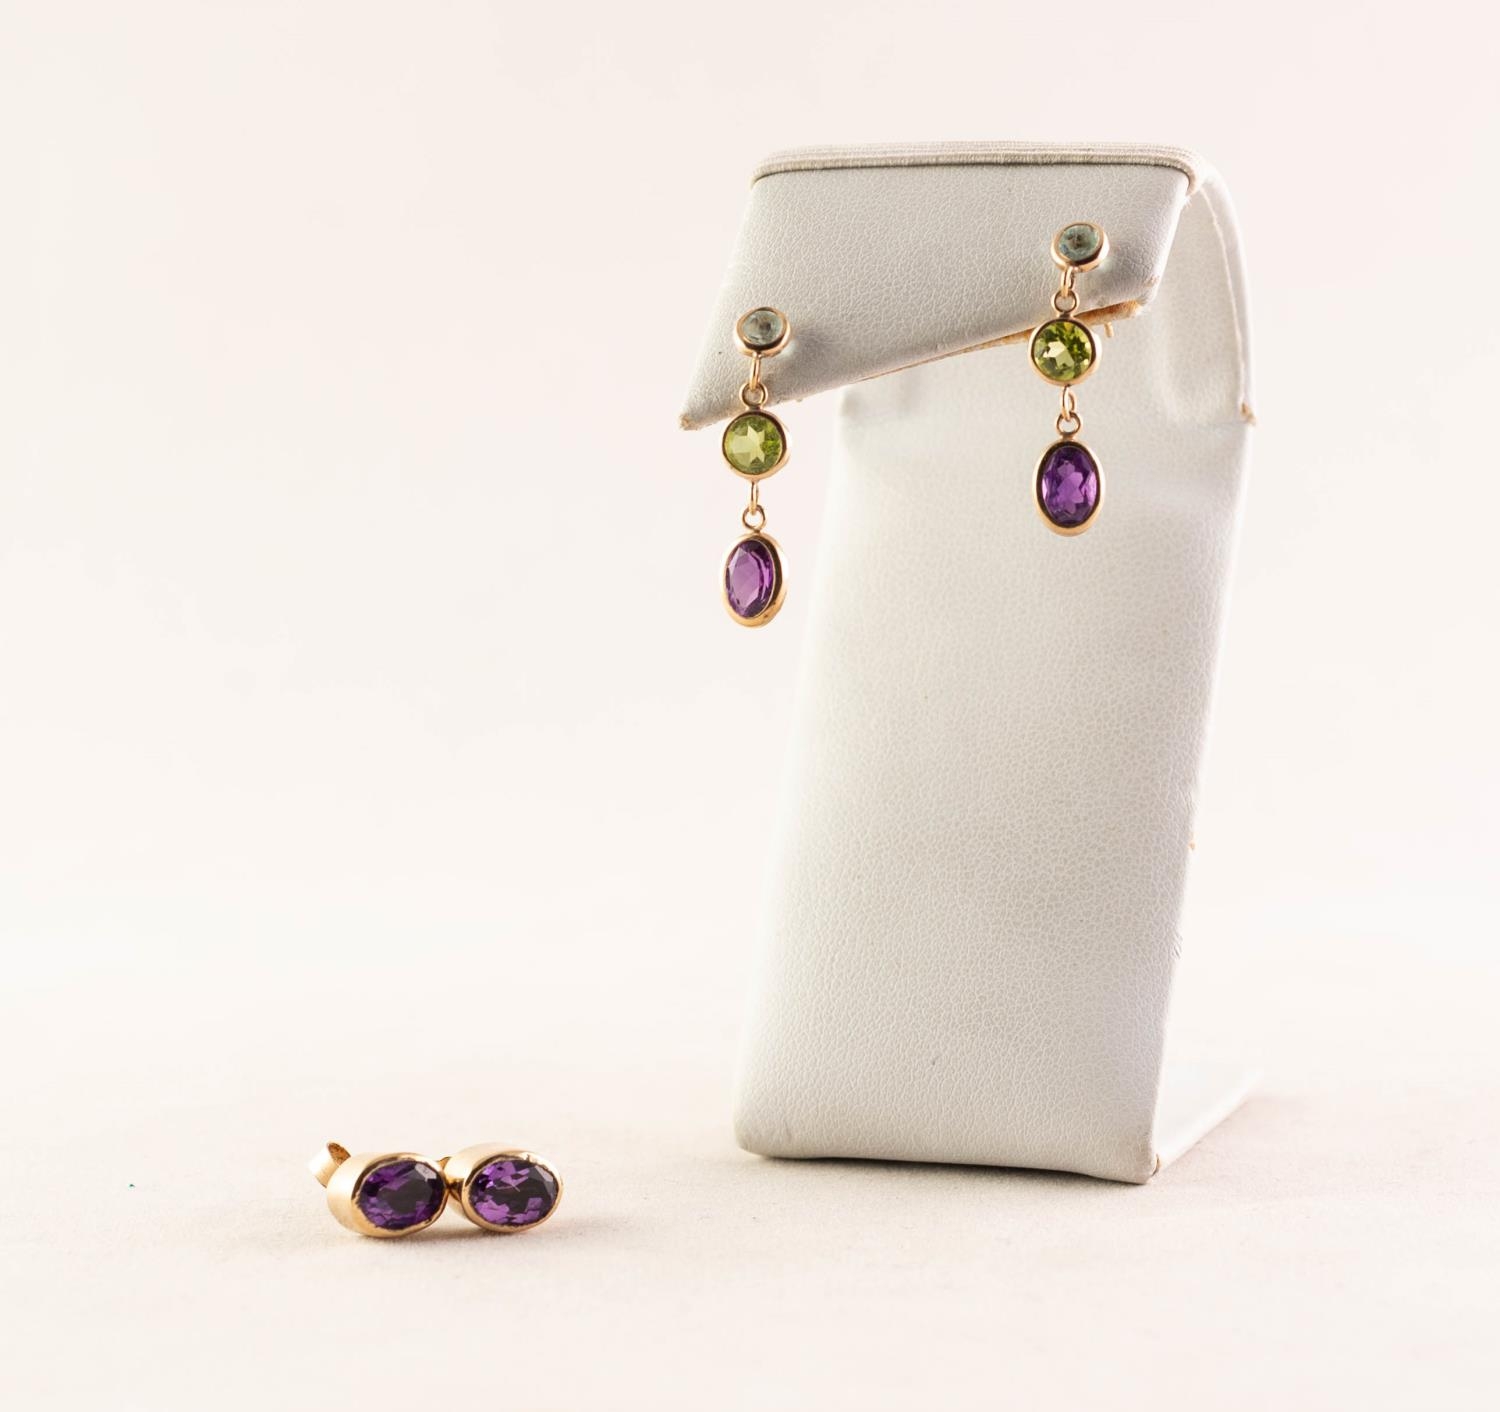 PAIR OF 9ct GOLD AMETHYST SET EARRINGS and another pair of 9ct GOLD PENDANT EARRINGS, each set